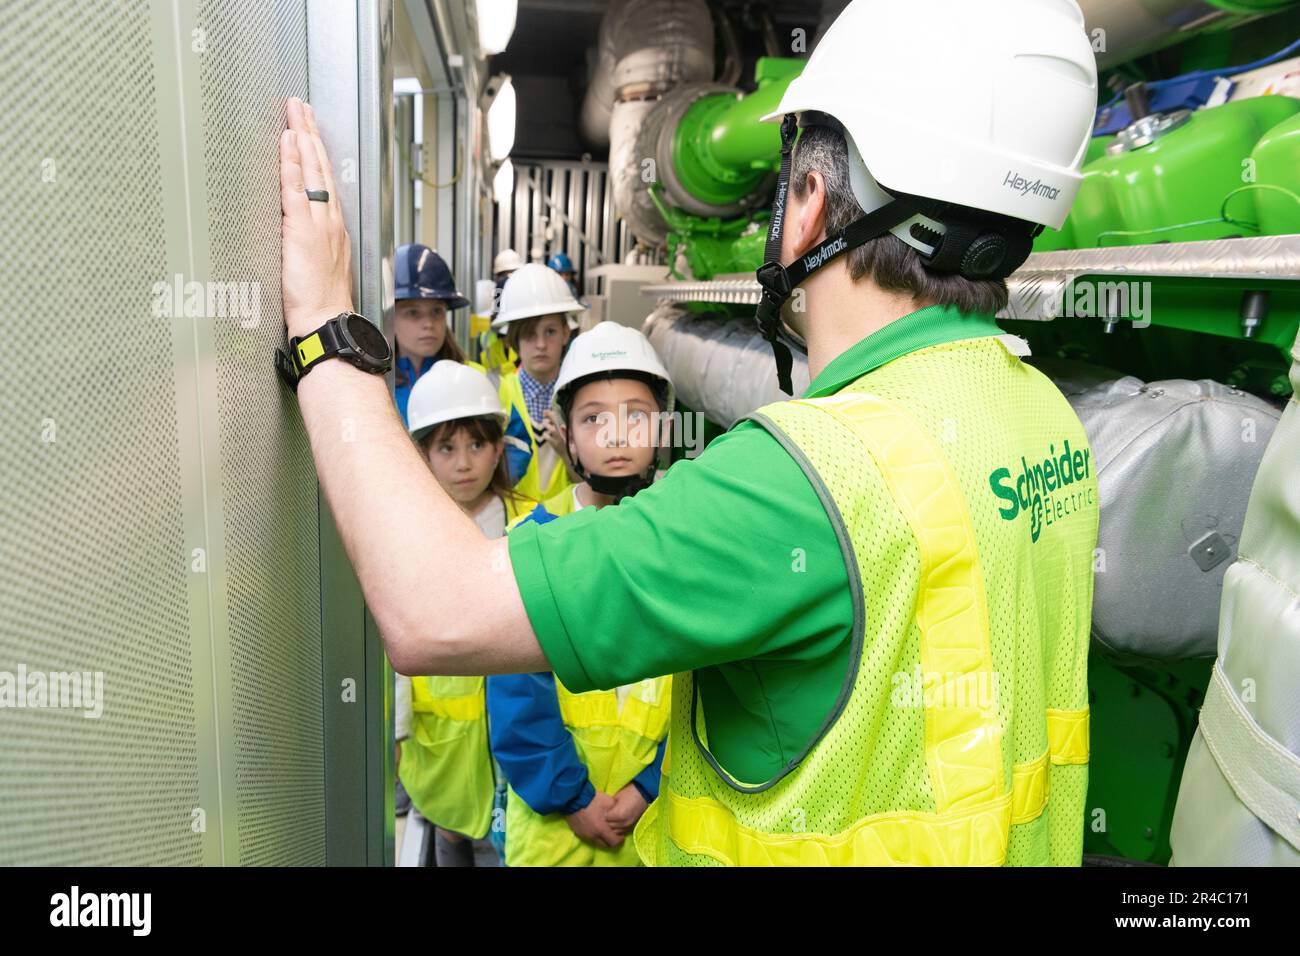 Nick Canton, Schneider Electric energy manager, gives participants a tour of generator sets for the new Combined Heating and Power (CHP) plant at Yokota Air Base, Japan, March 24, 2023. This CHP plant is part of an Energy Savings Performance Contract (ESPC) which began active construction in 2020.  An ESPC is a partnership between federal agencies and energy service companies that provides energy savings, resiliency, and facility improvements with no up-front capital costs to the government. Stock Photo